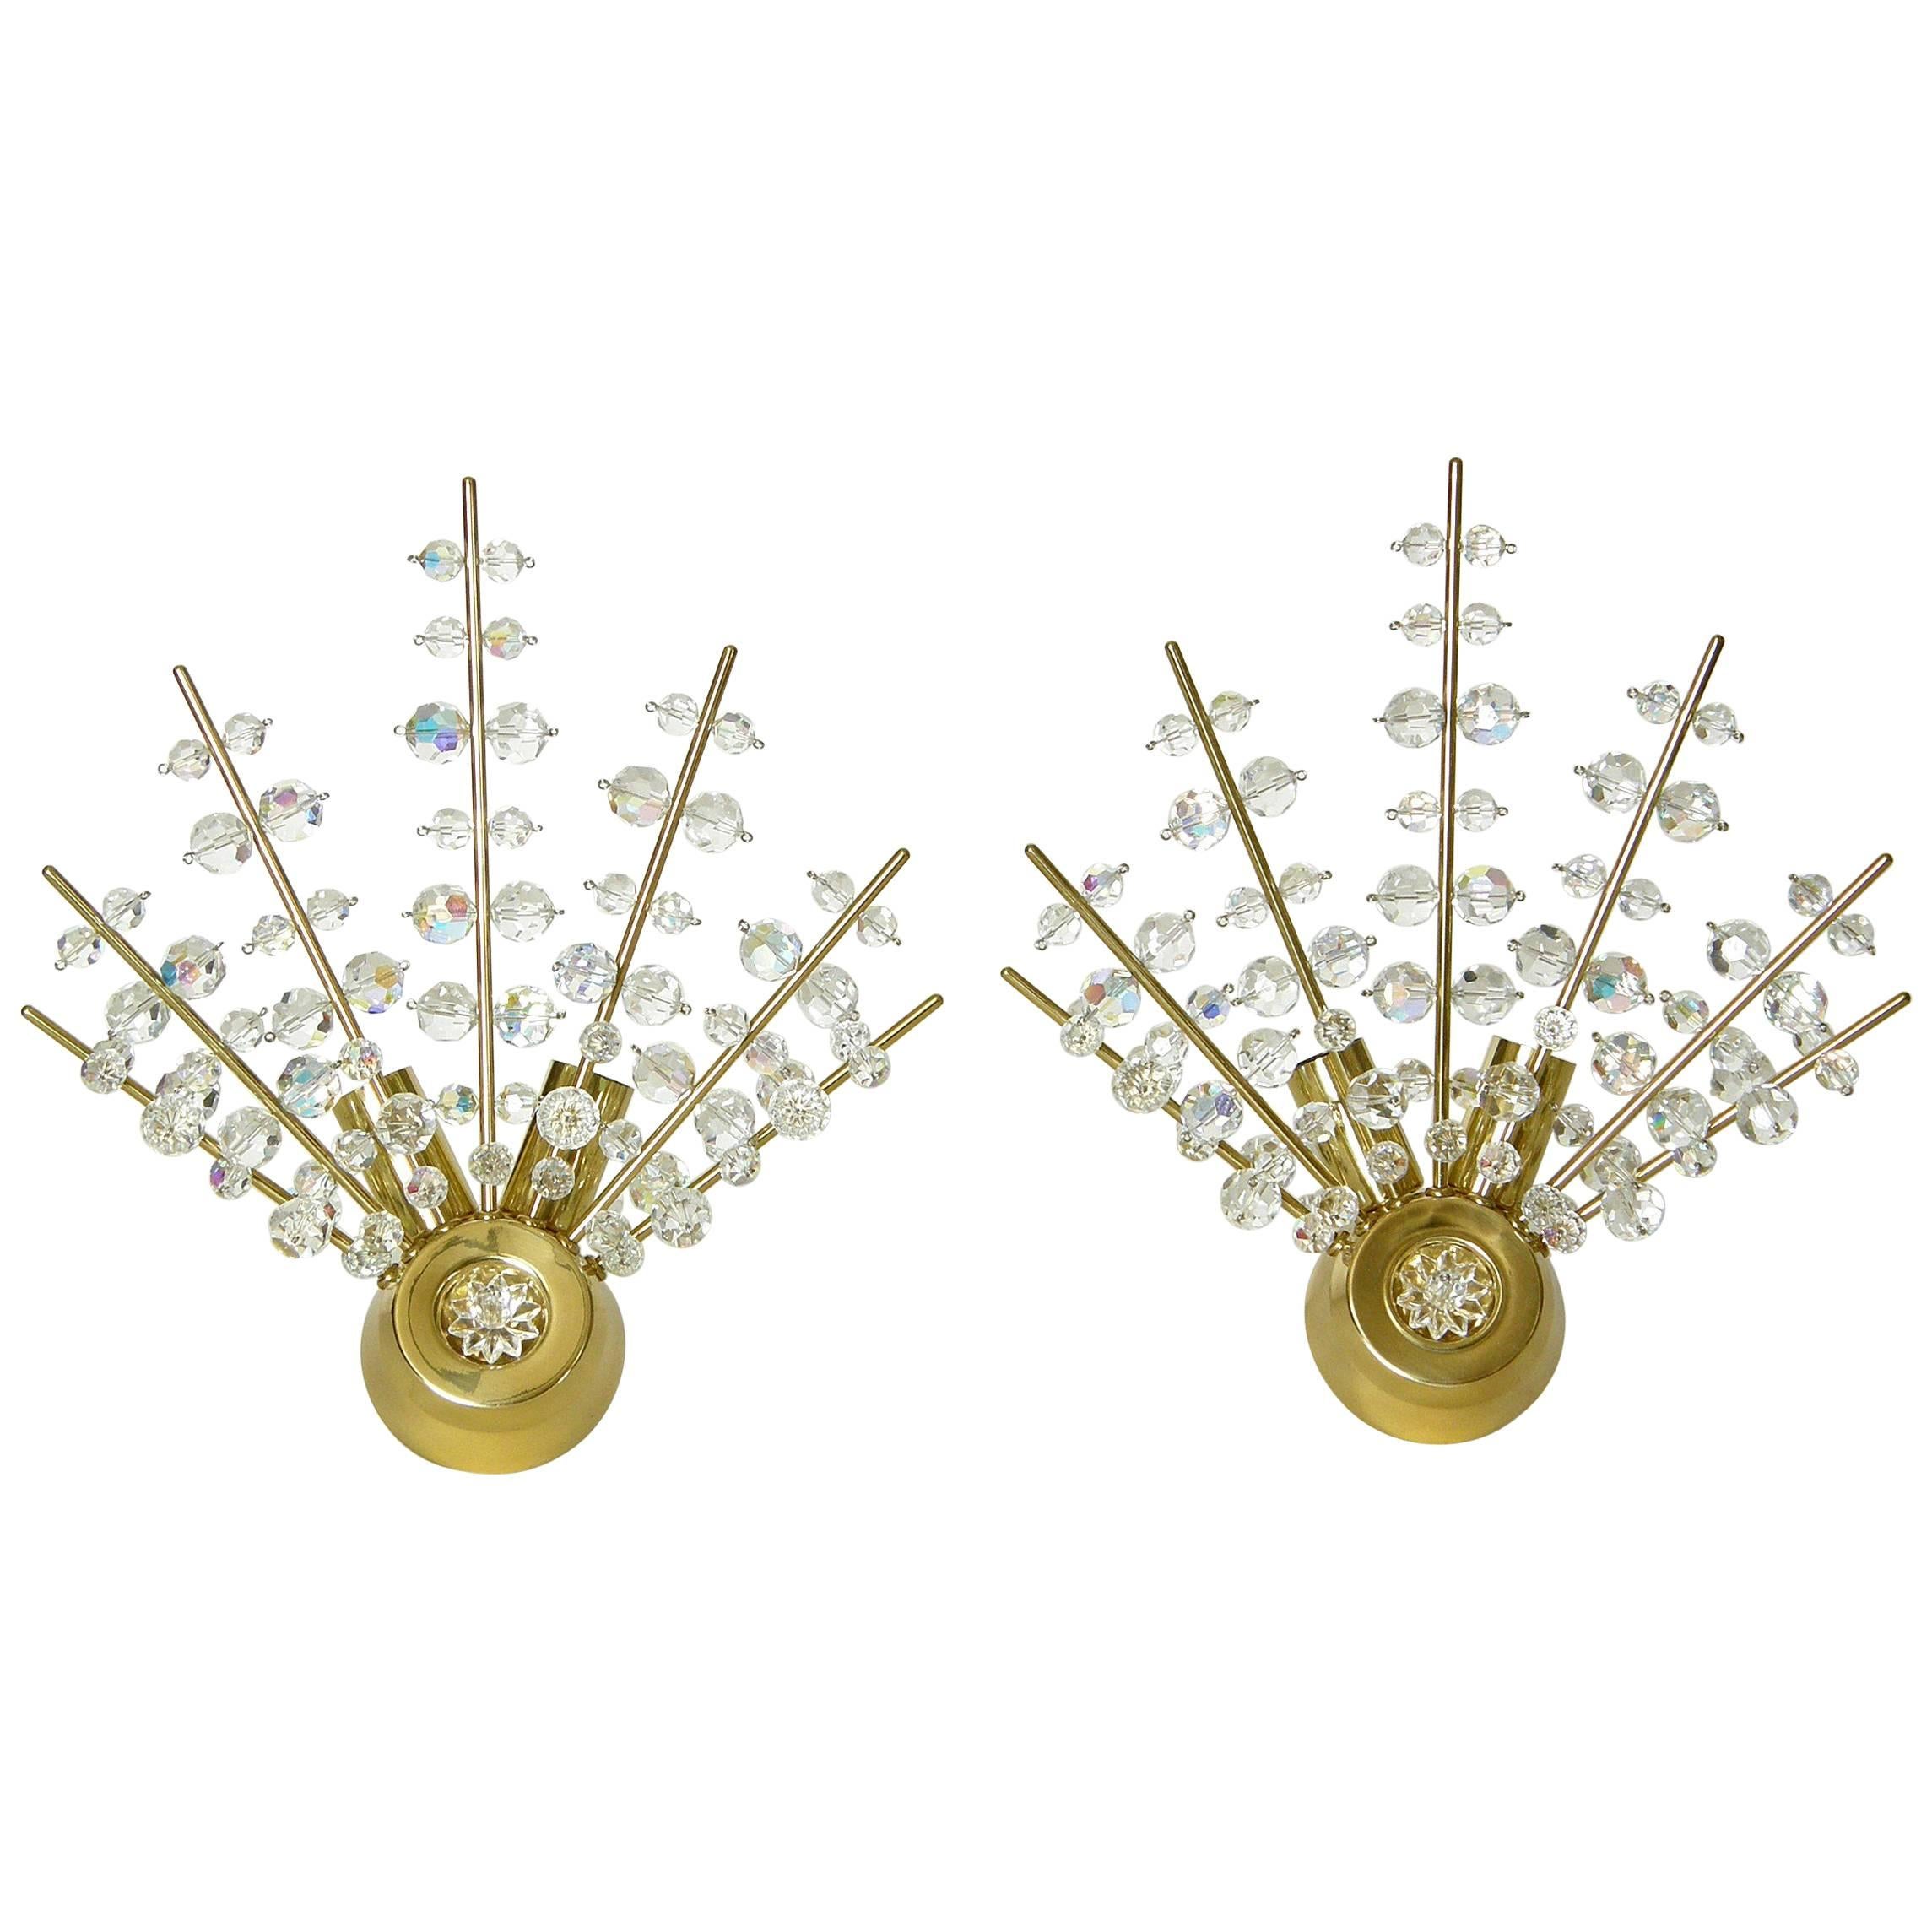 Pair of Brass and Cut Crystal Sputnik Wall Sconces